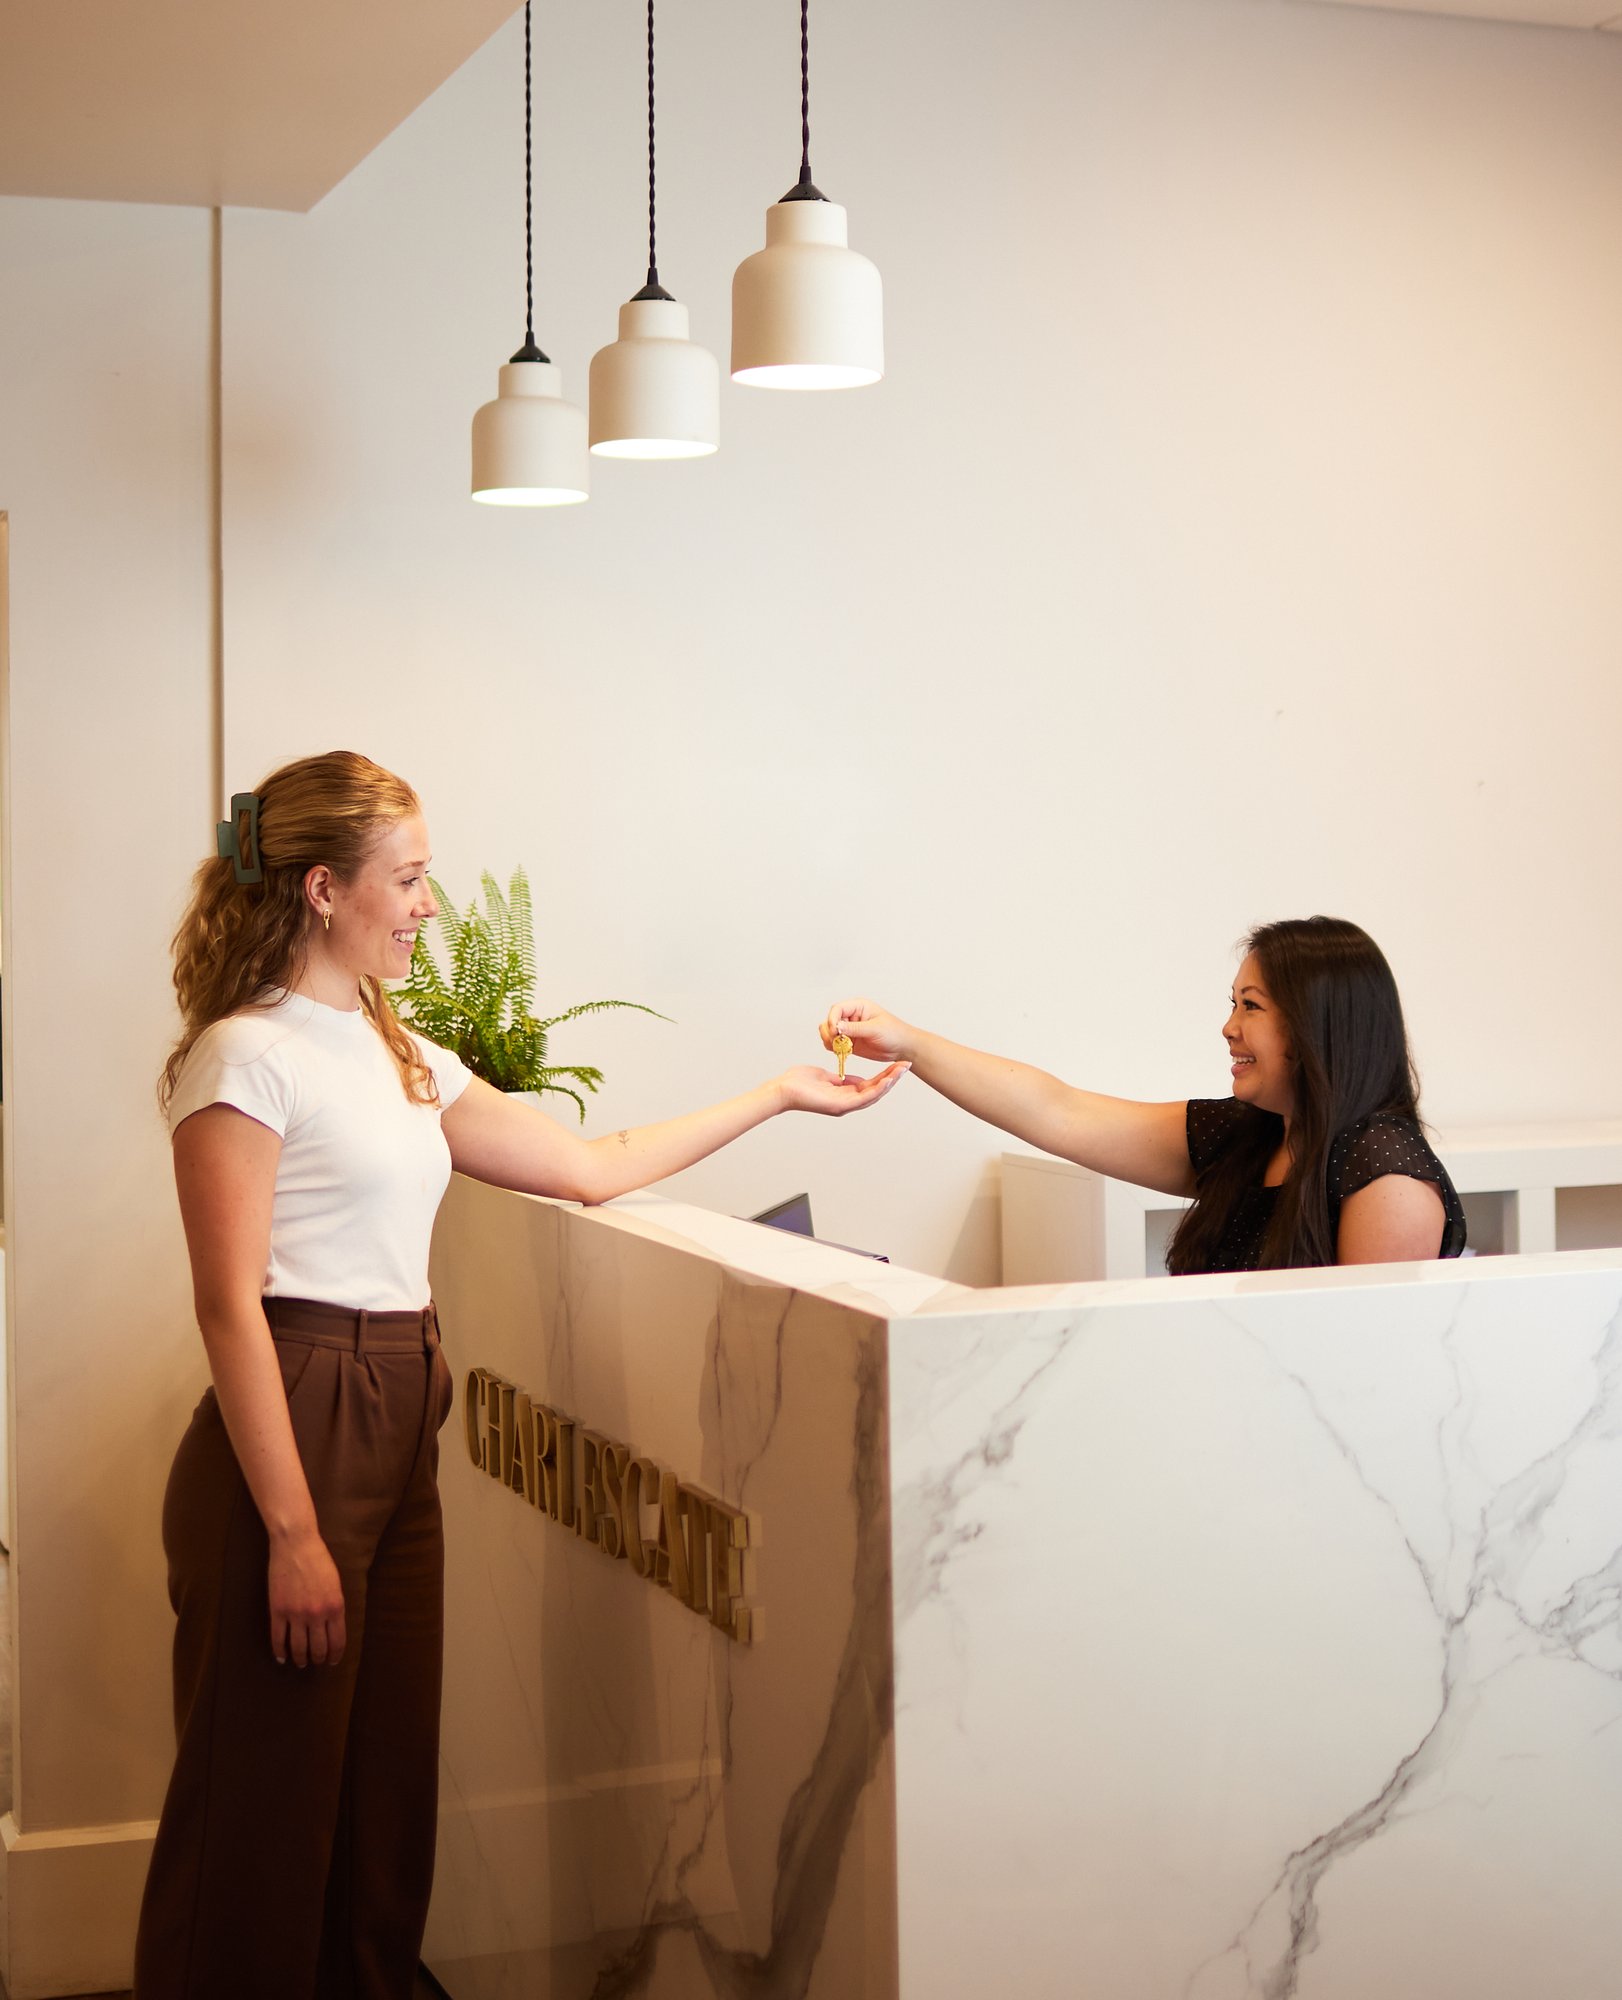 CHARLESGATE front desk woman handing keys to another woman